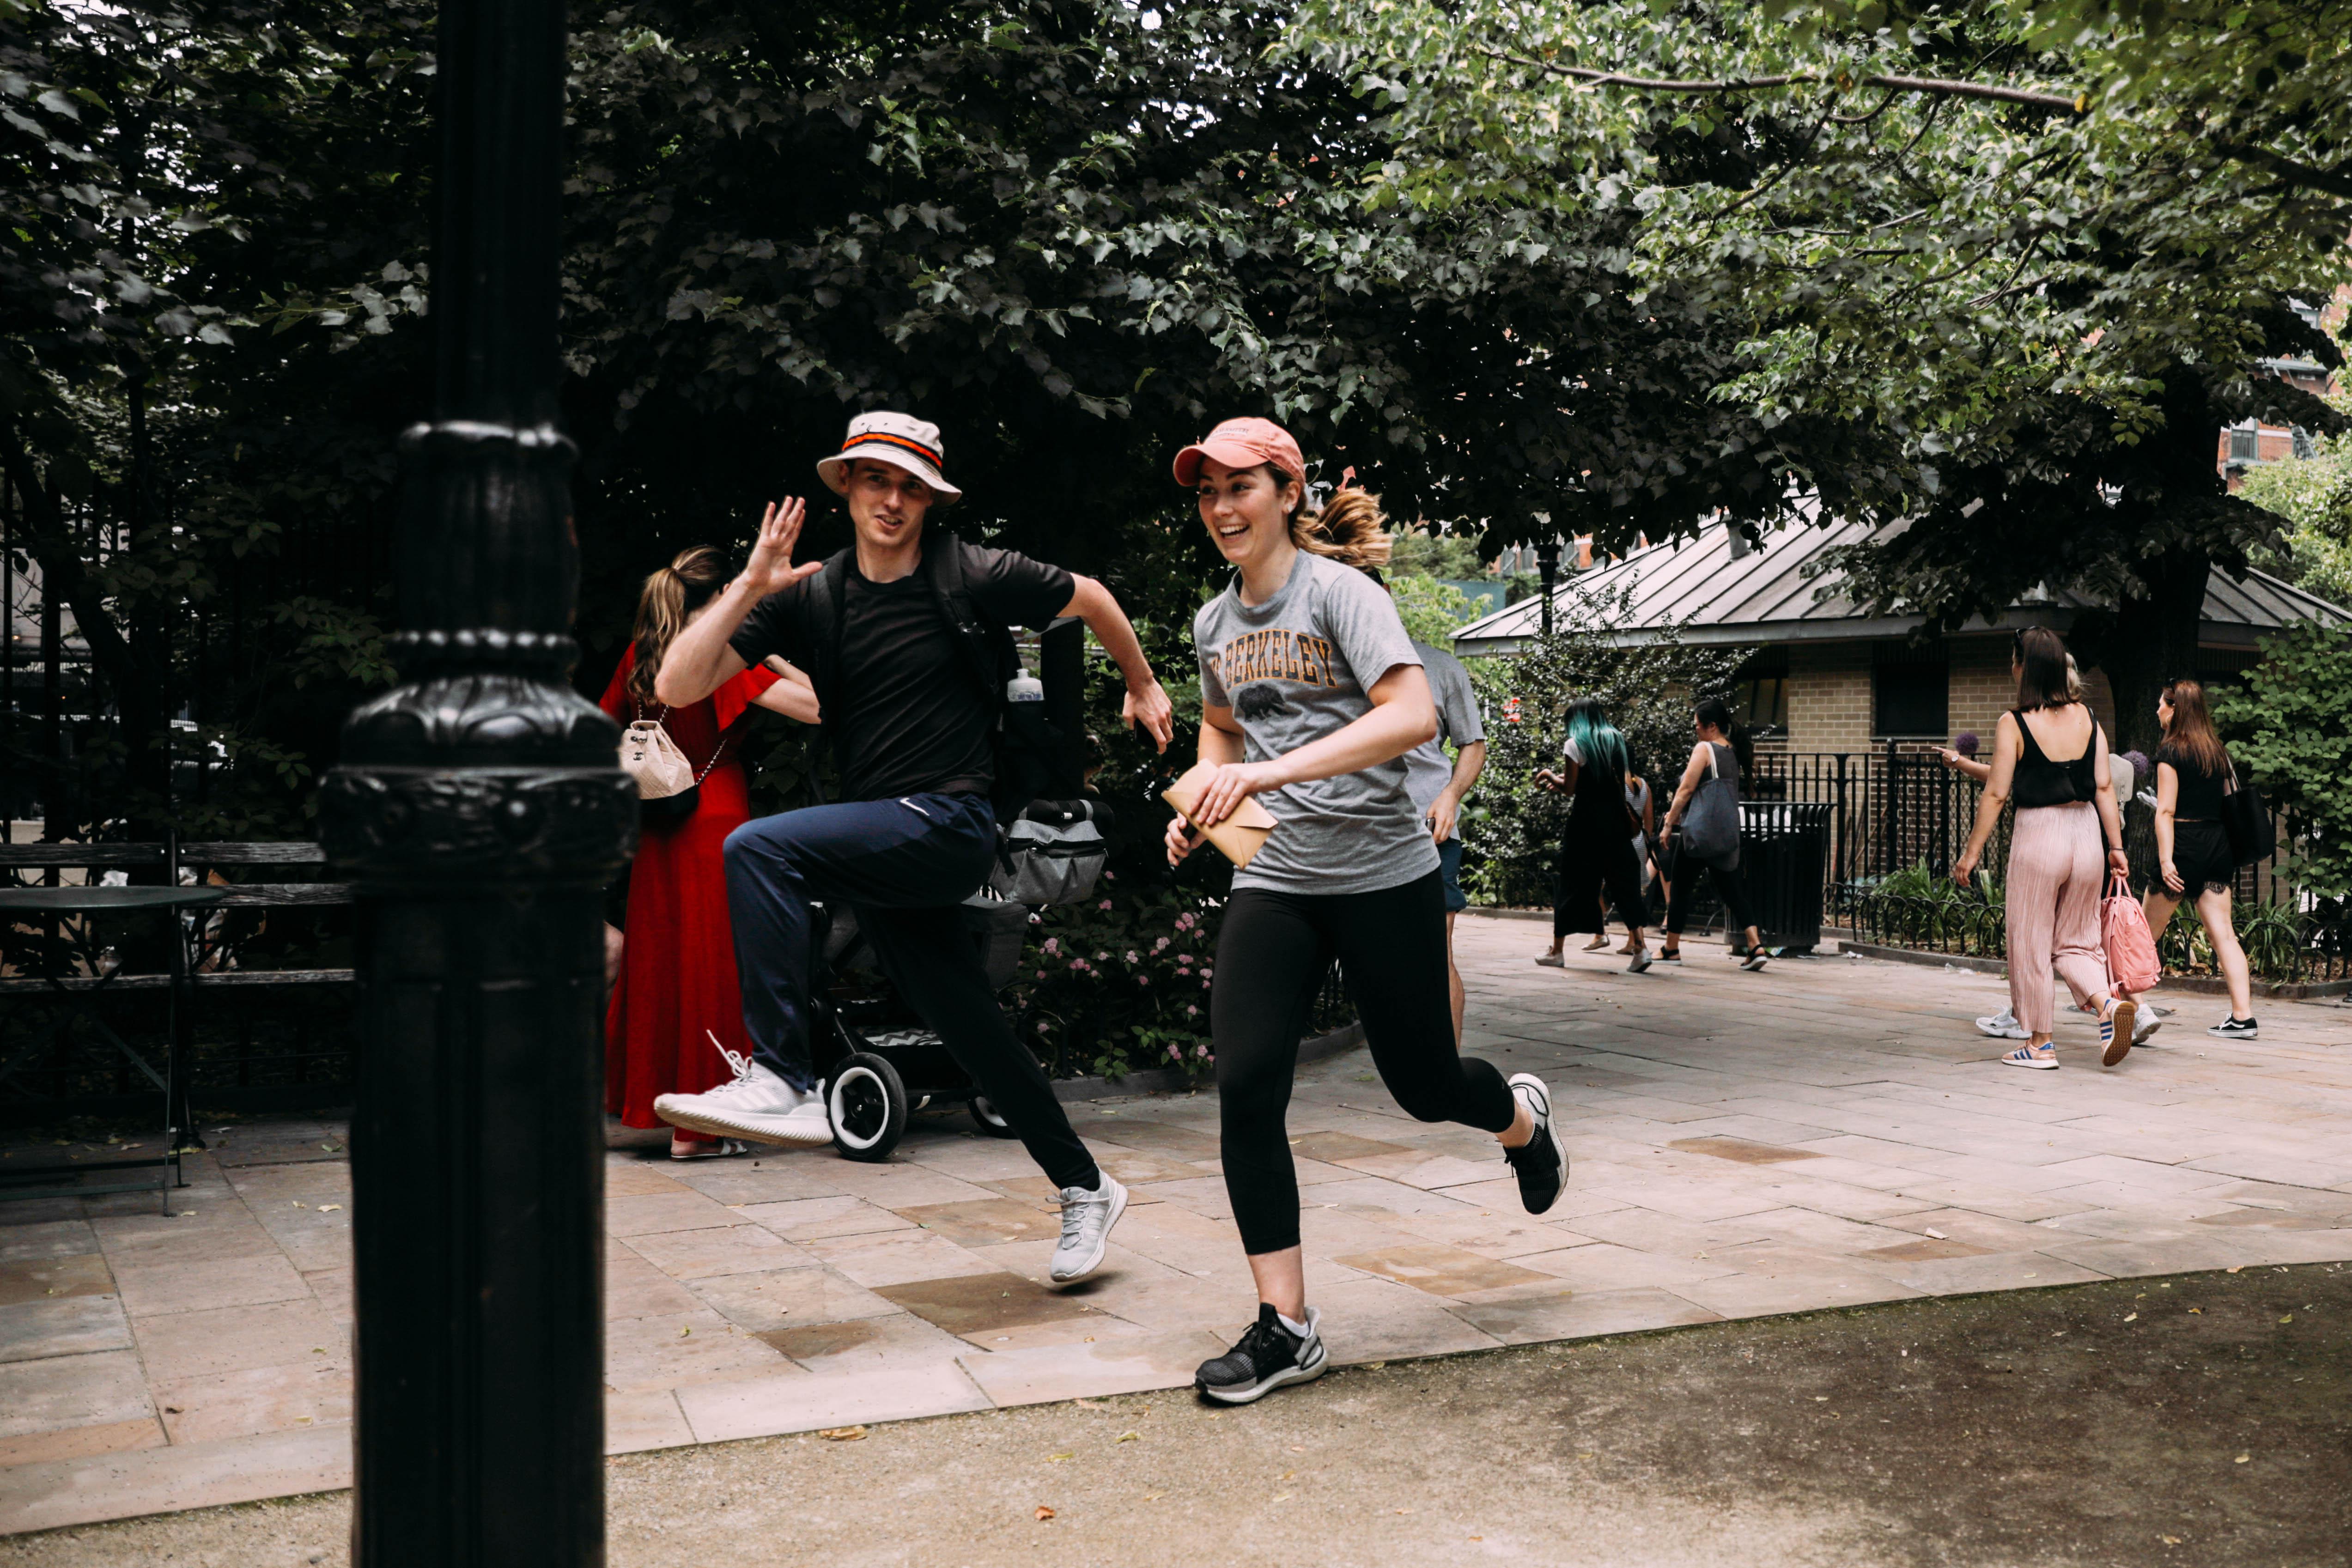 Two people sprinting